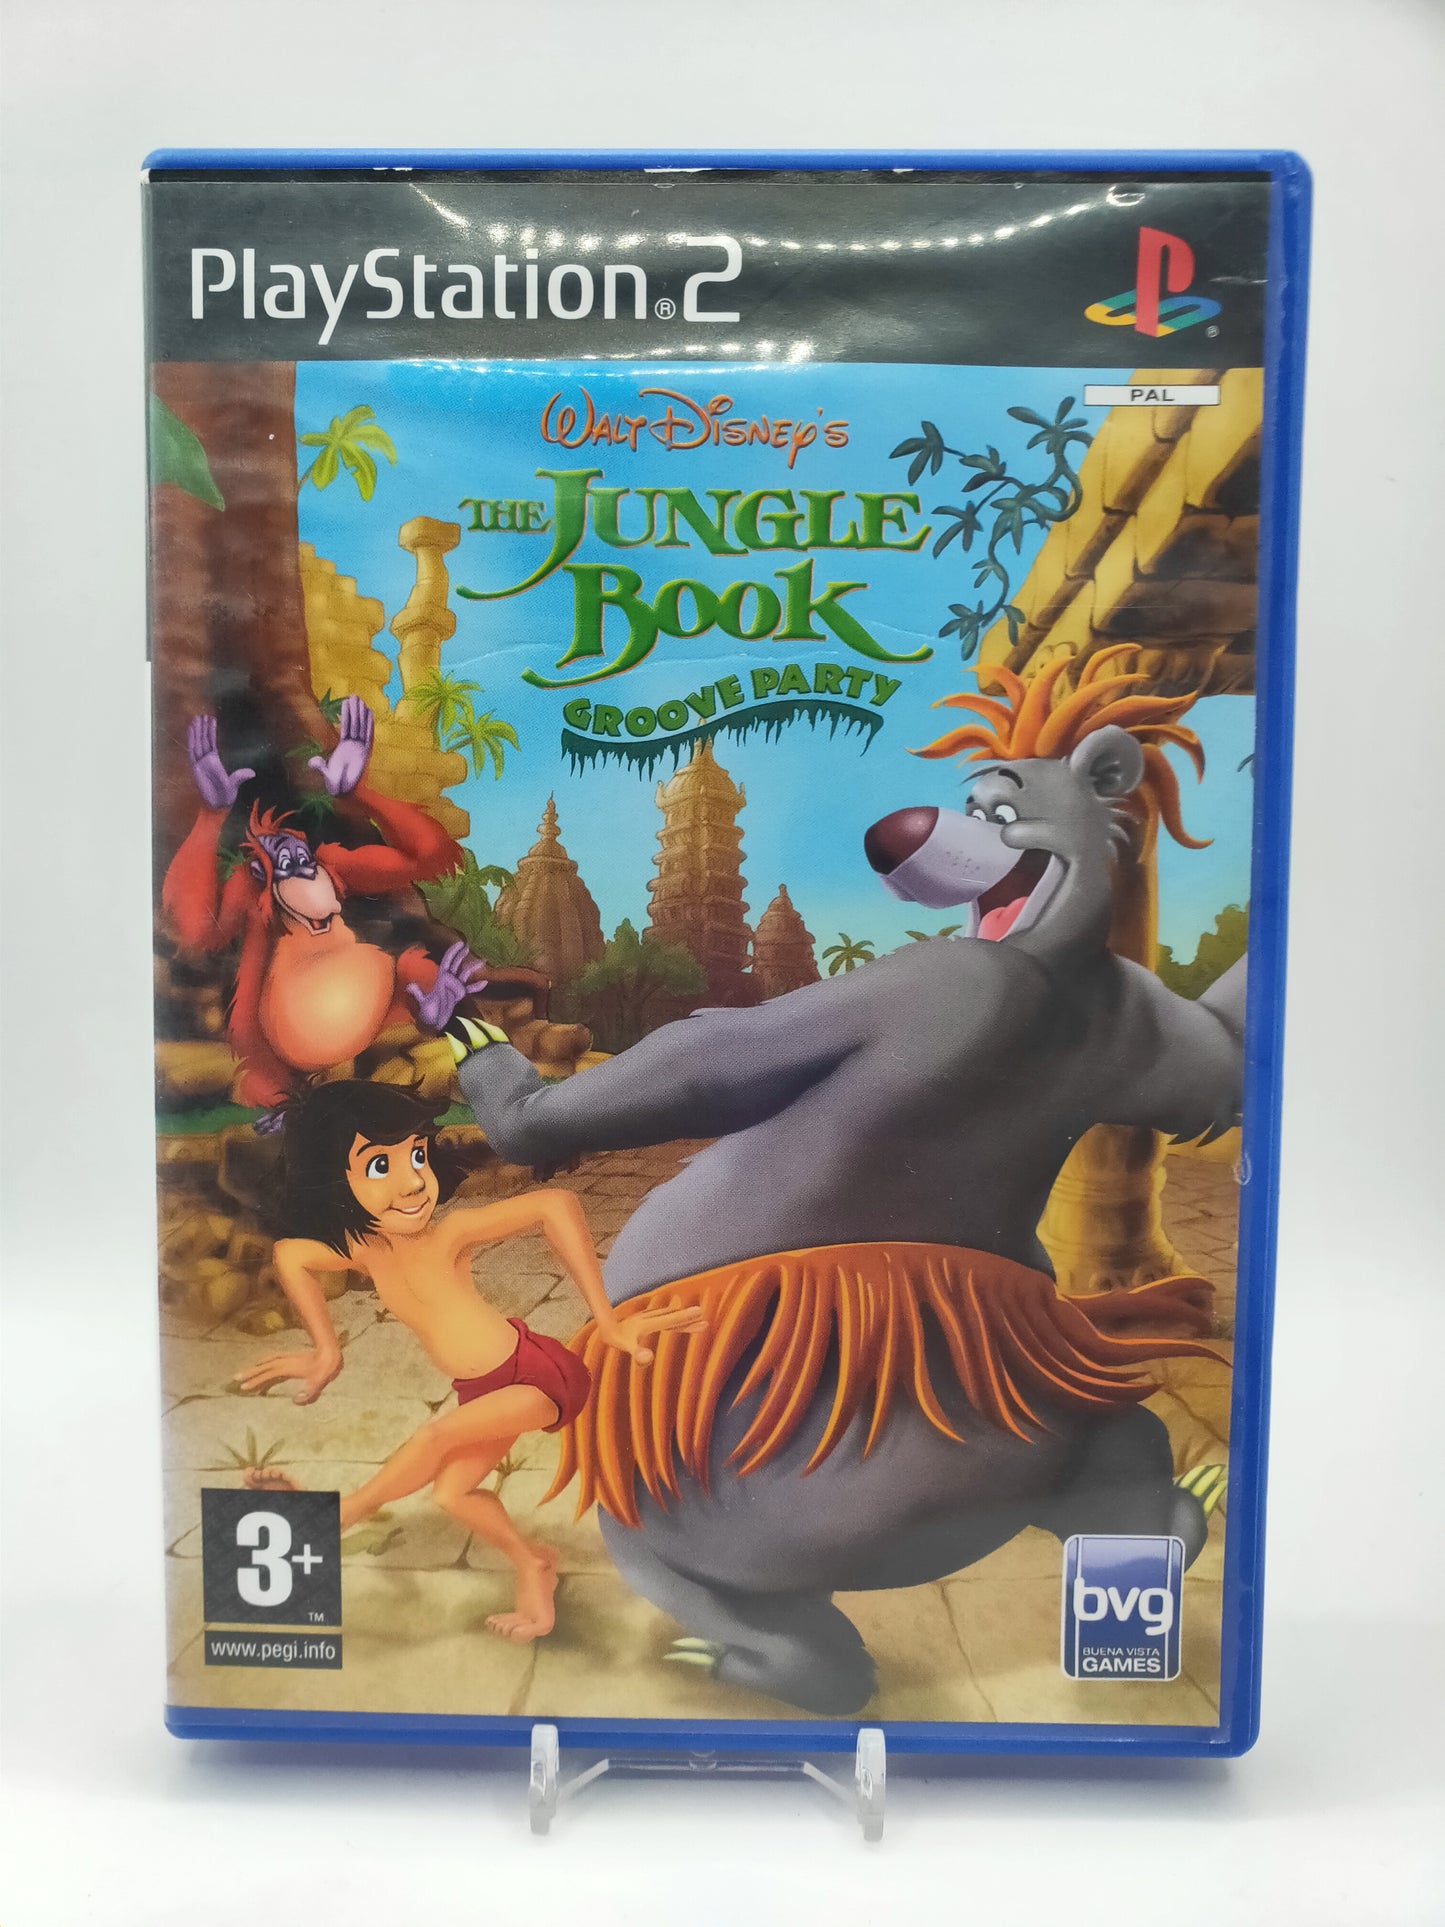 Walt Disney's The Jungle Book Groove Party PS2